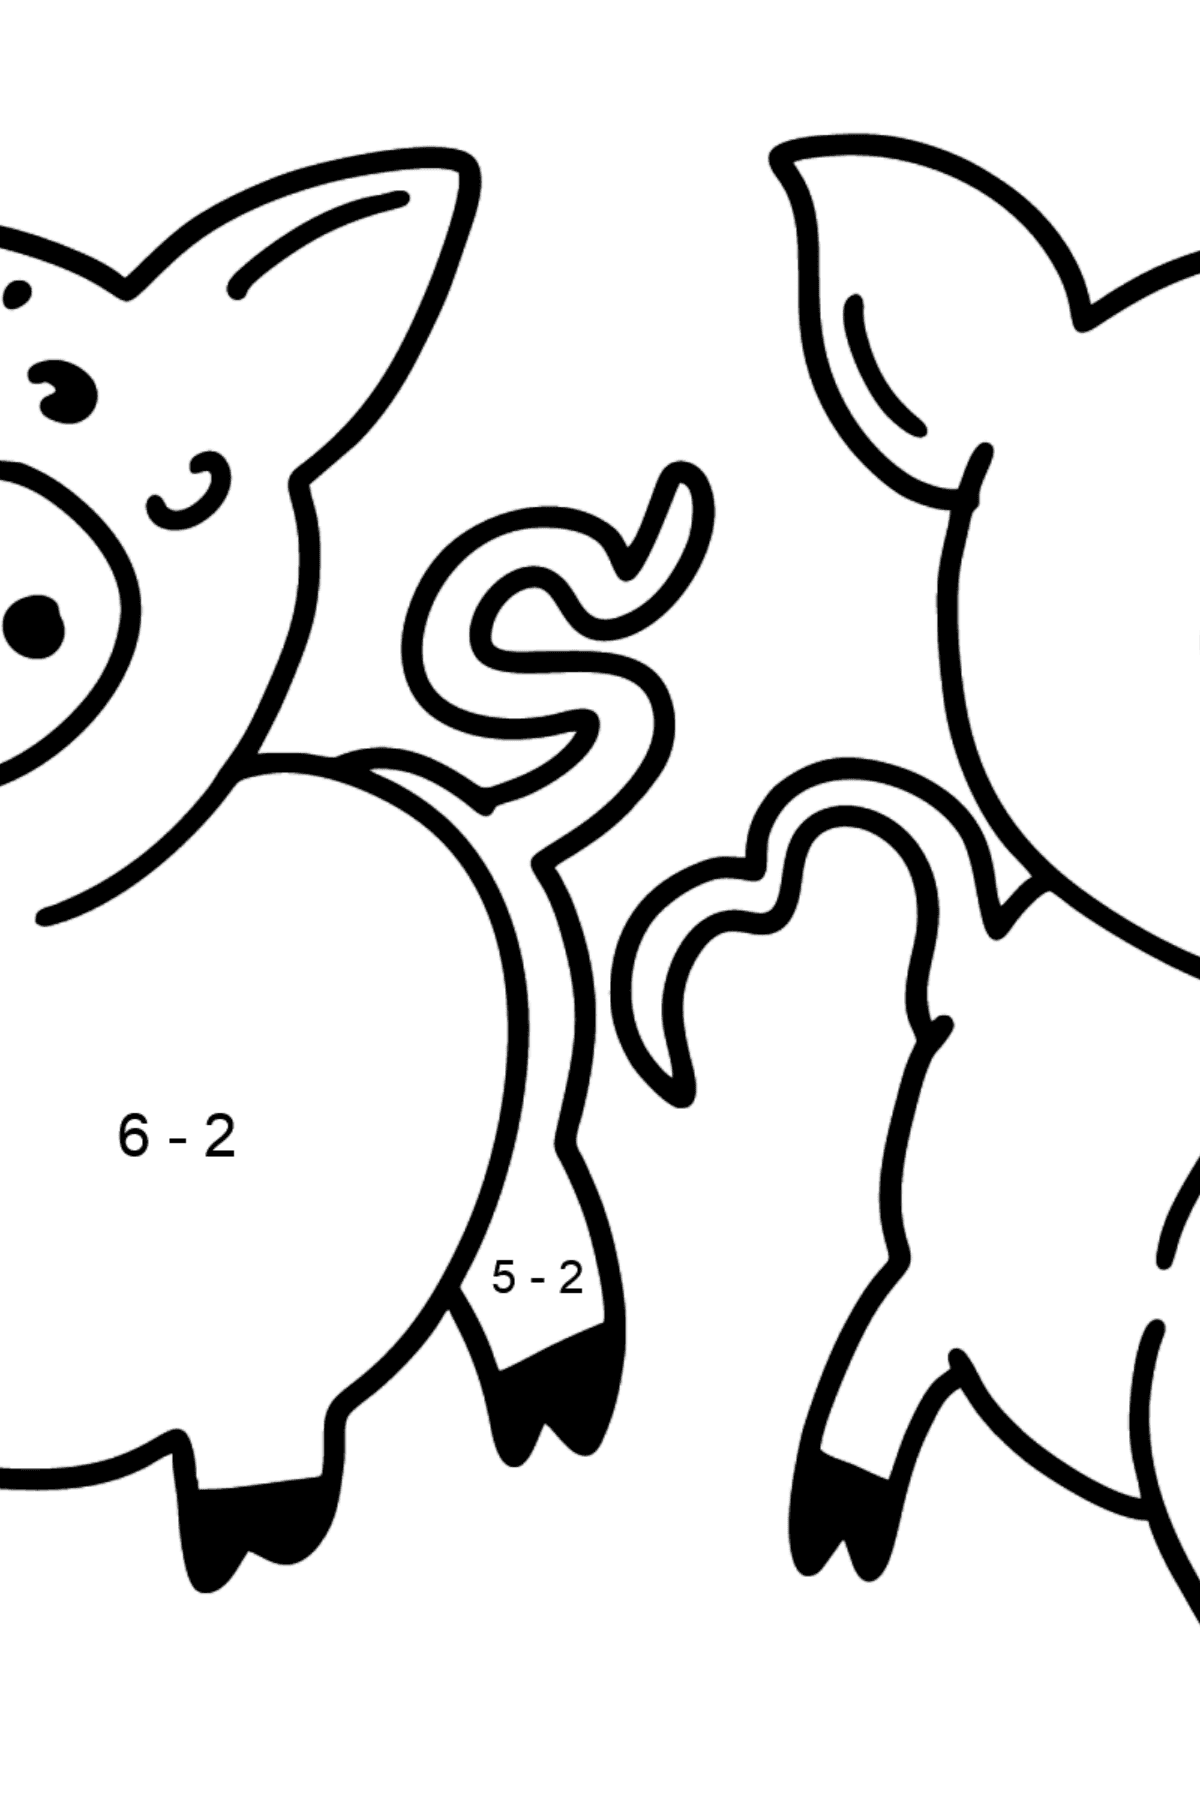 Piglets coloring page - Math Coloring - Subtraction for Kids